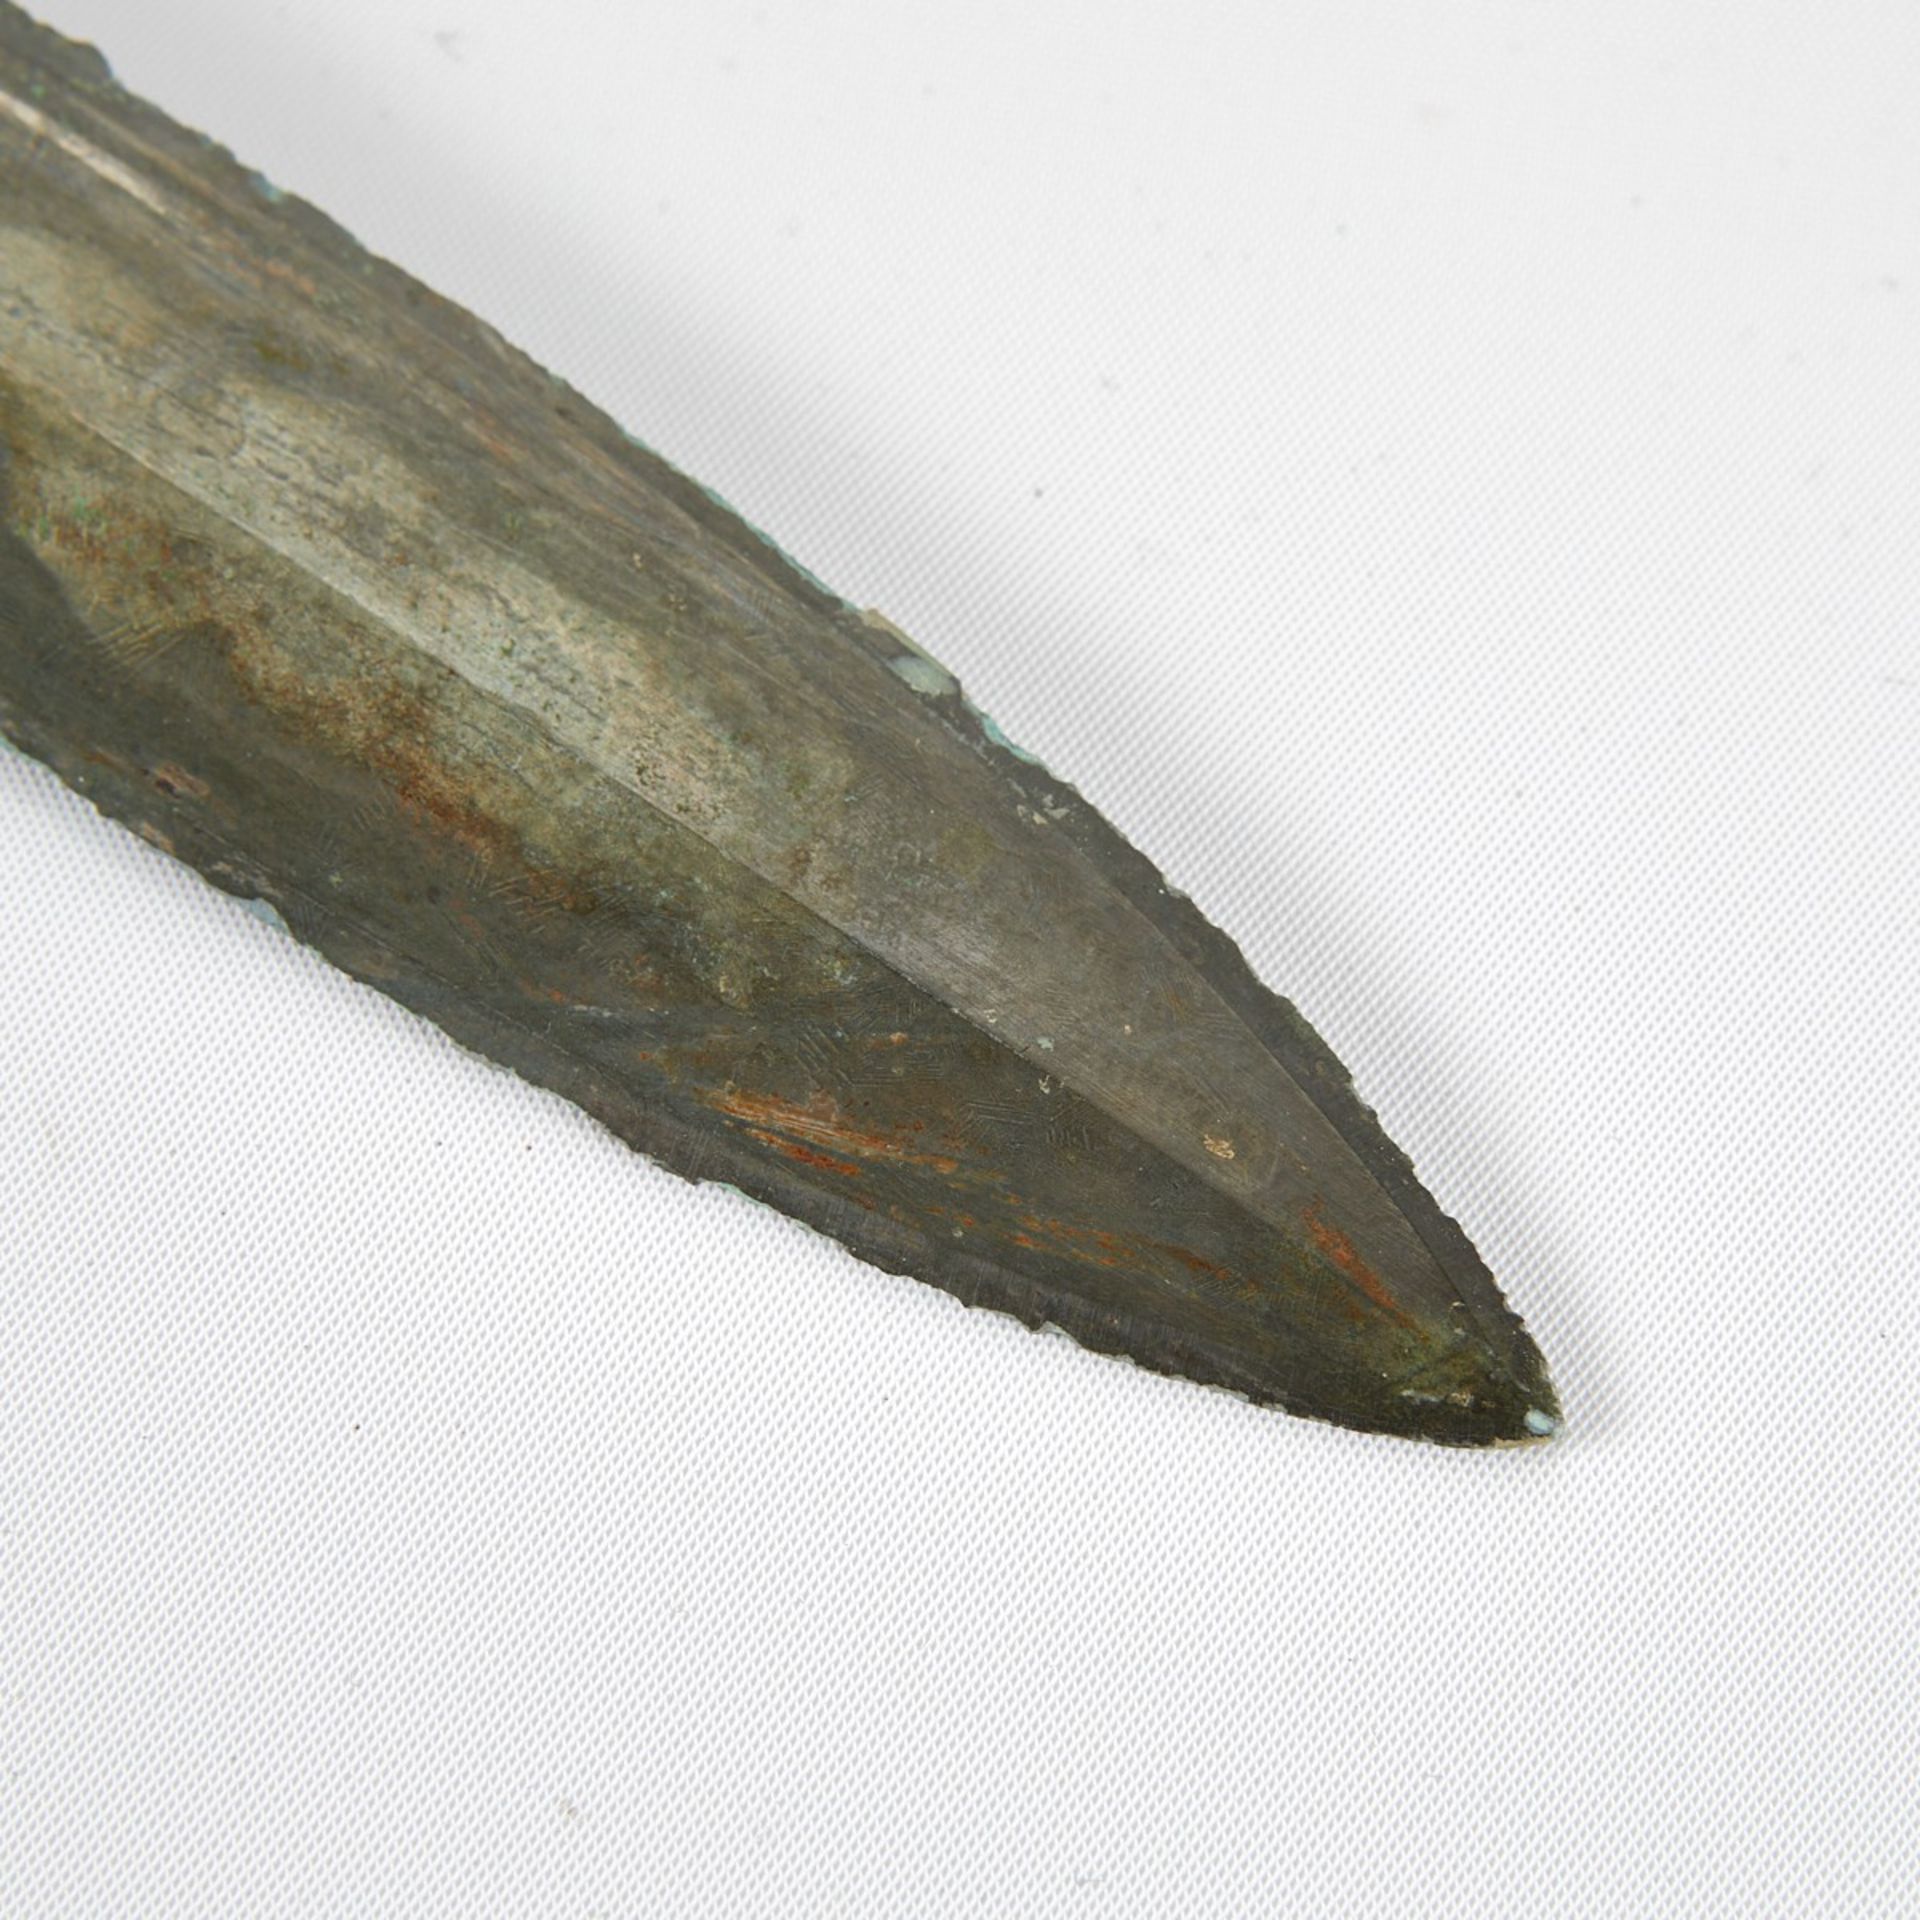 Early Chinese Bronze Sword Warring States - Image 5 of 10